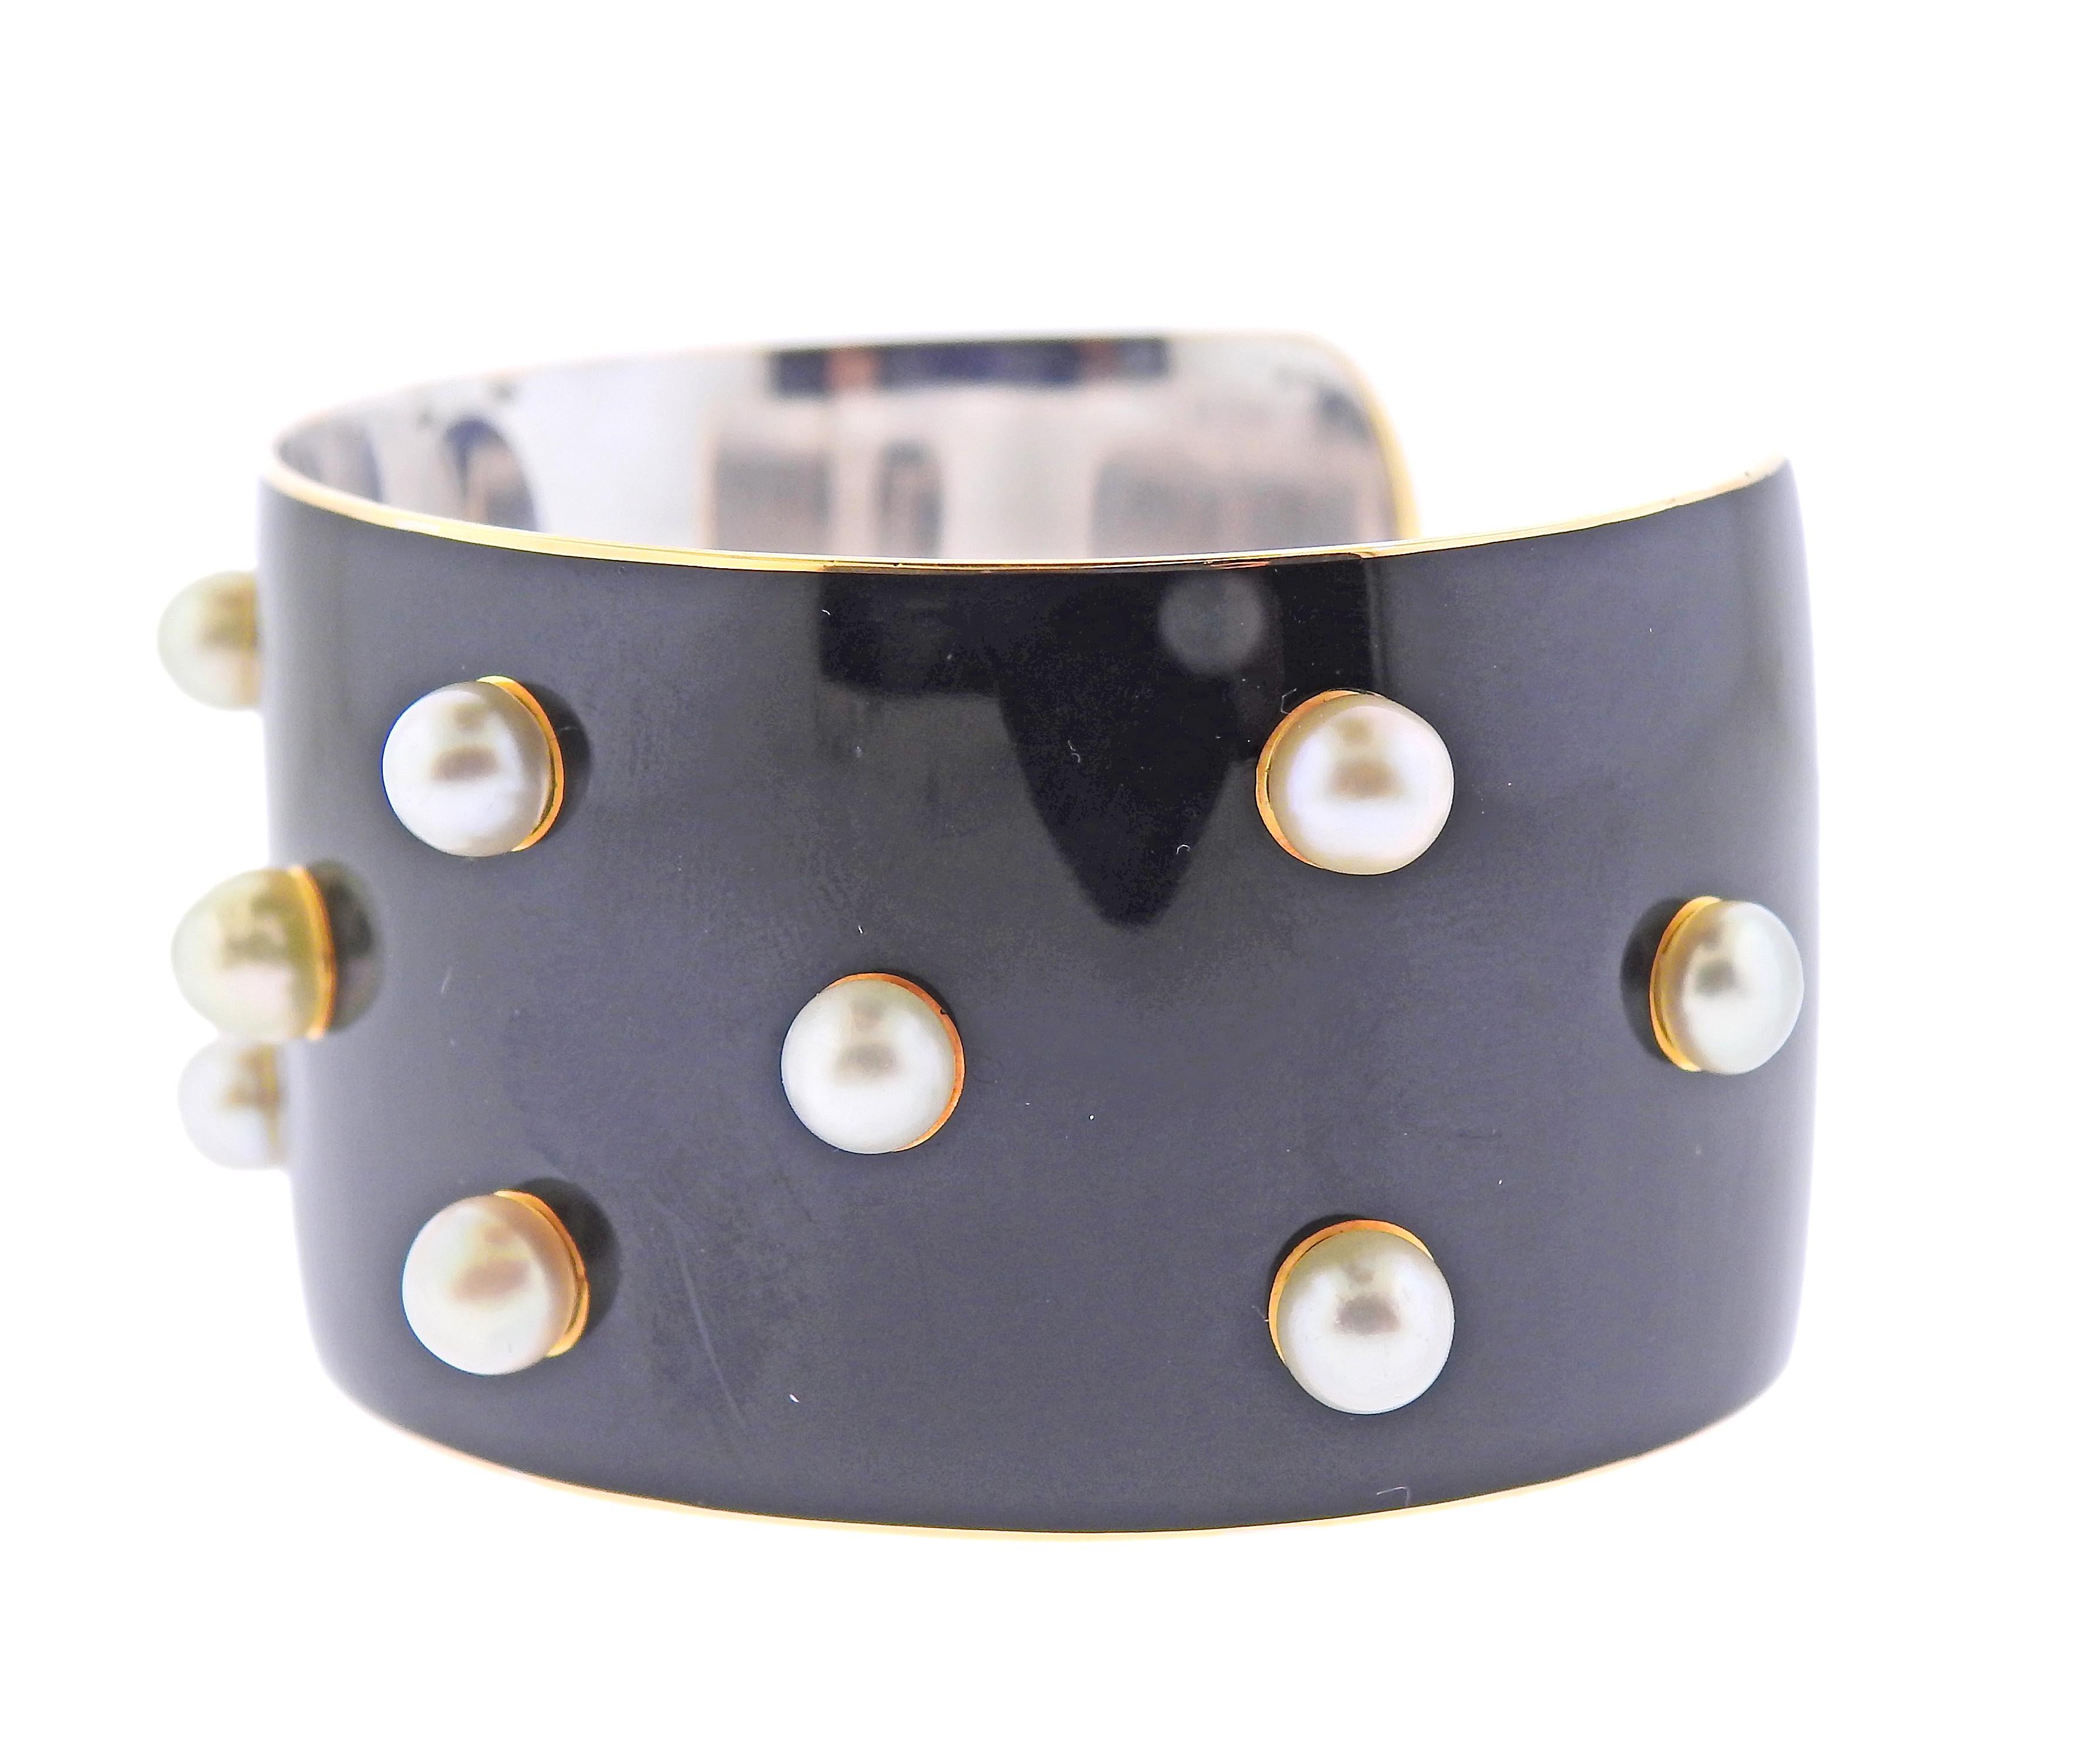 Mid century French made cuff bracelet in 18k white gold, decorated with black lacquer enamel and 5mm pearls. Bracelet will comfortably fit an average wrist 6.75